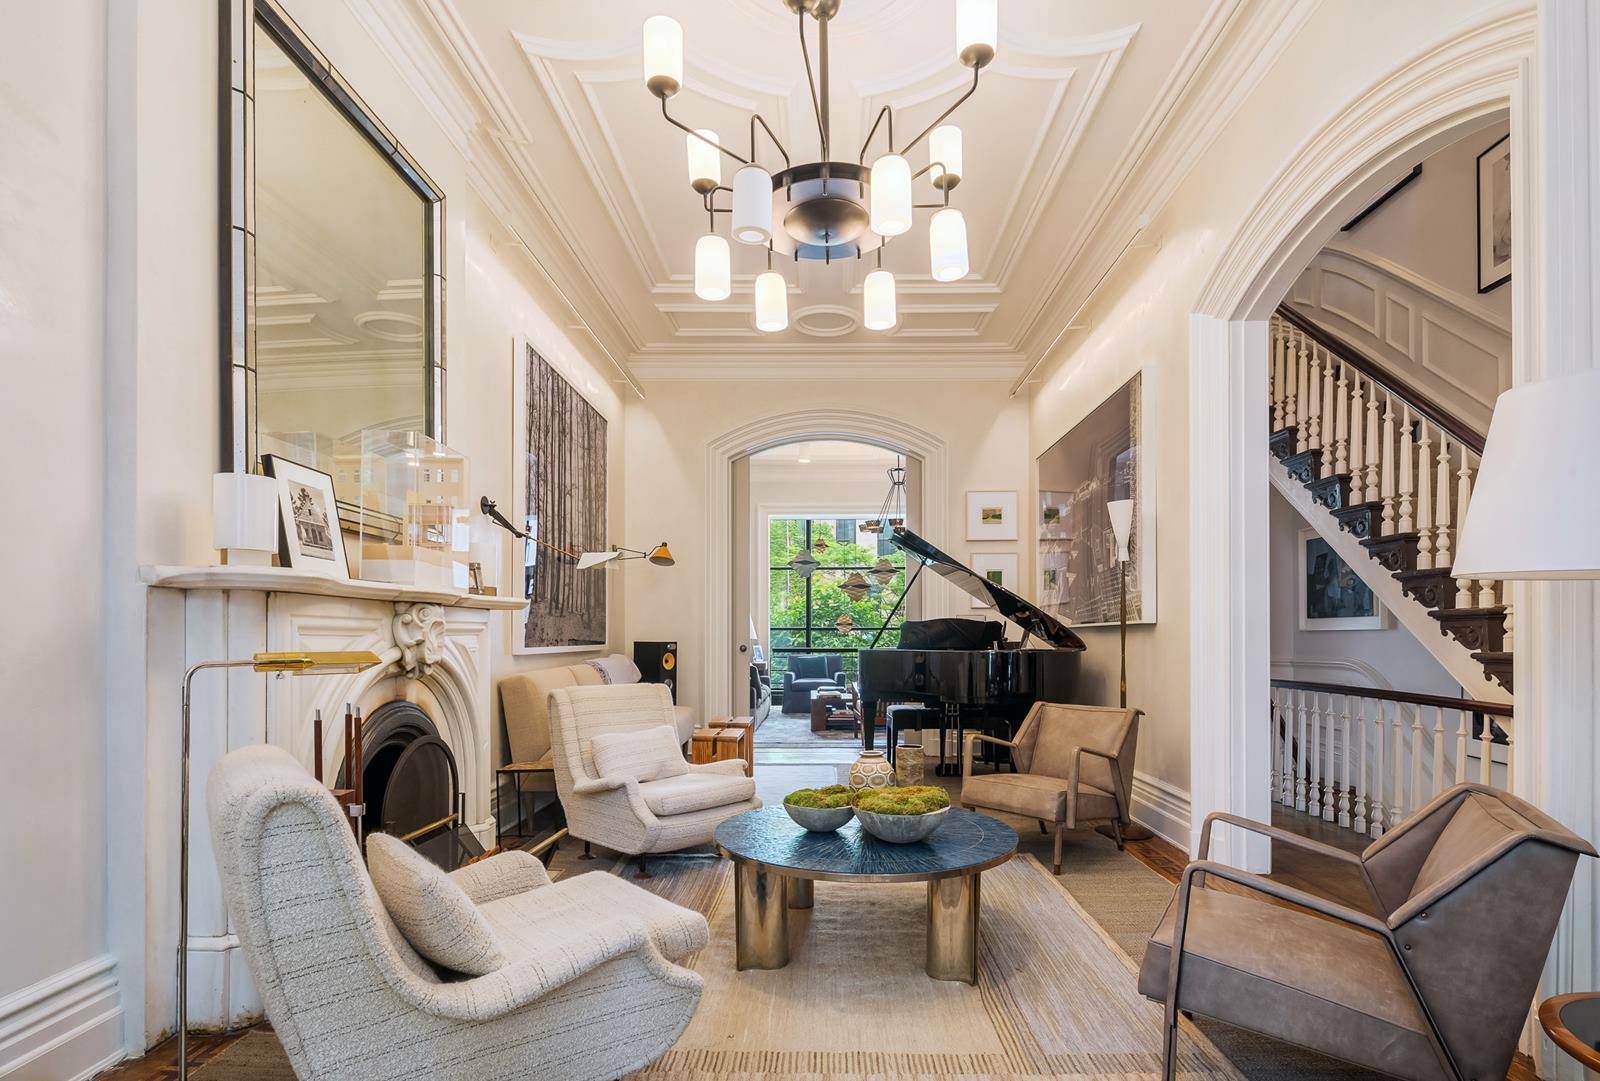 Dream West Village Mansion Exceptionally tall and extraodinarily deep Italiante townhome on 95 lot with stunning southern views and light on the very best West Village block.